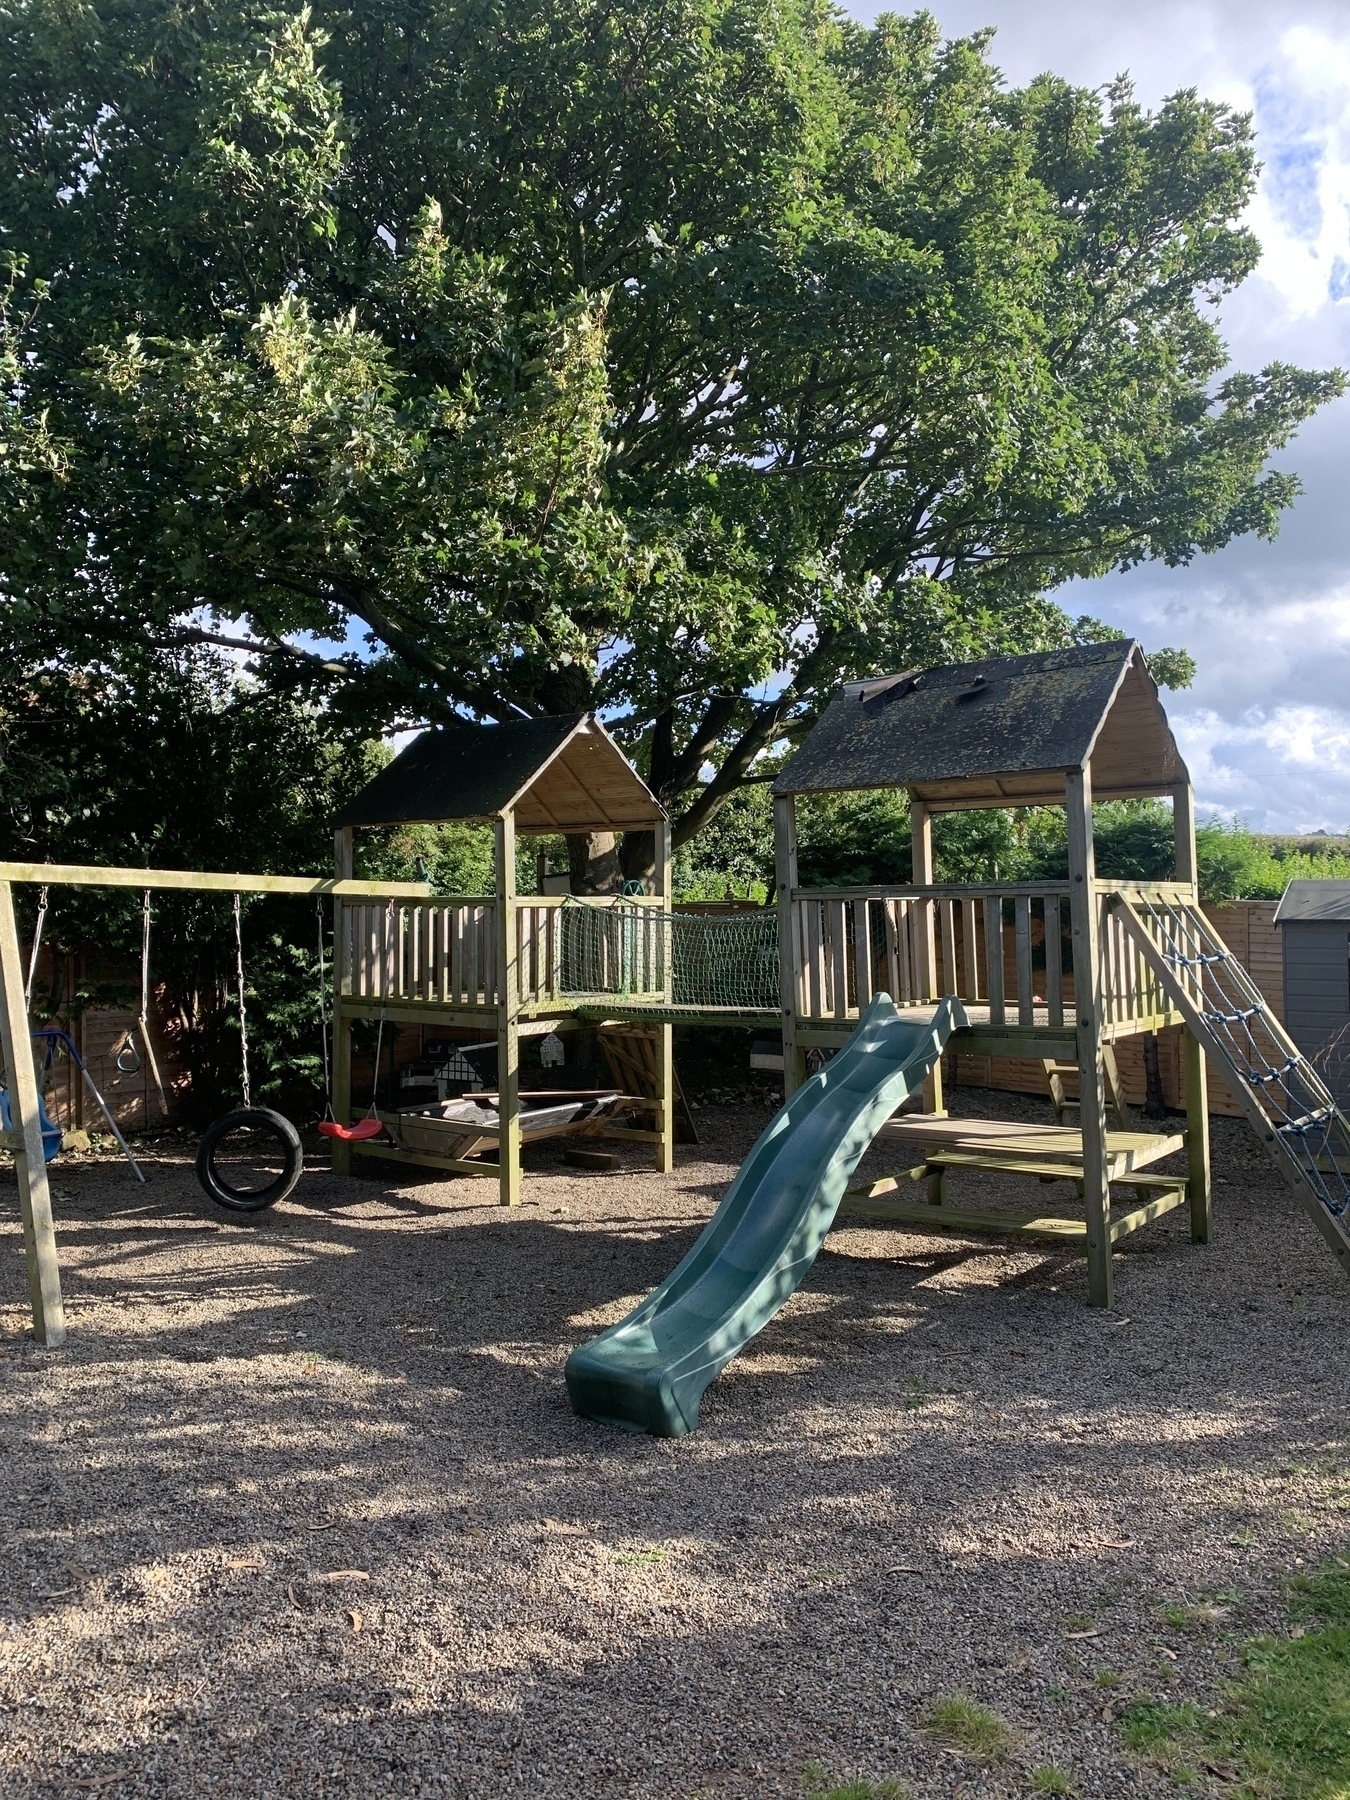 Wooden climbing frame with slide and tyre swing.